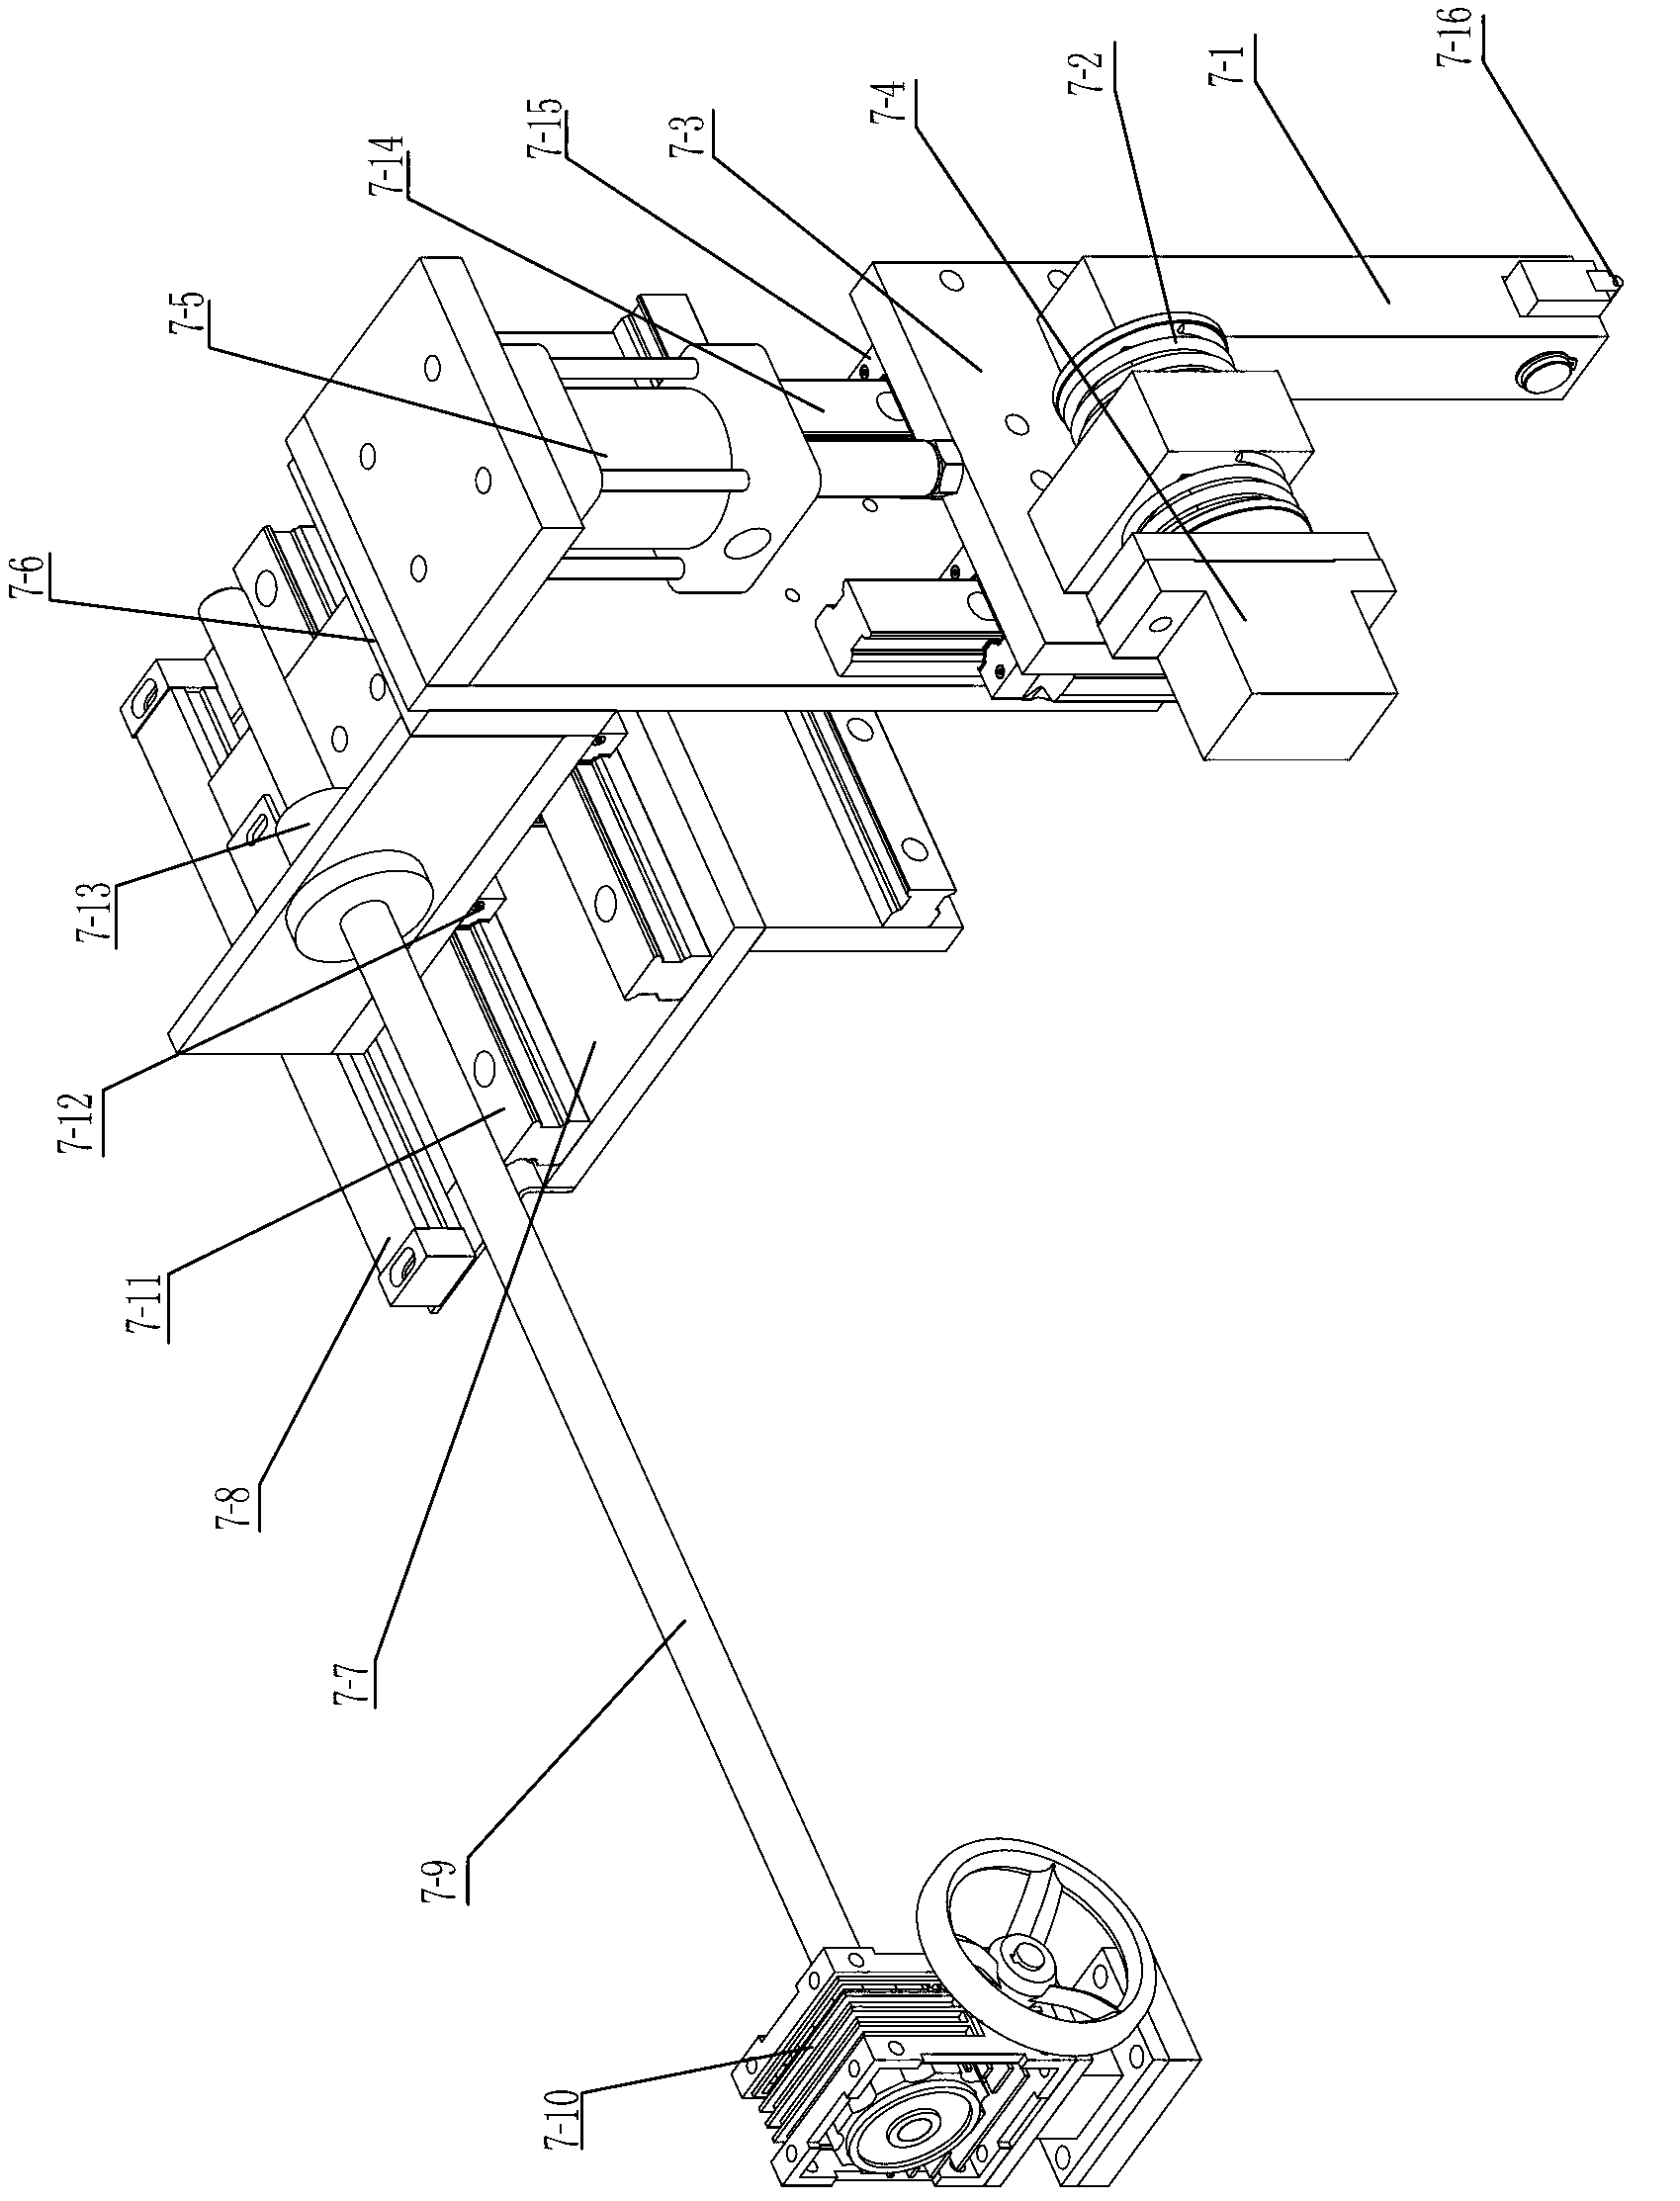 Feed pre-positioning method and device for molded plate